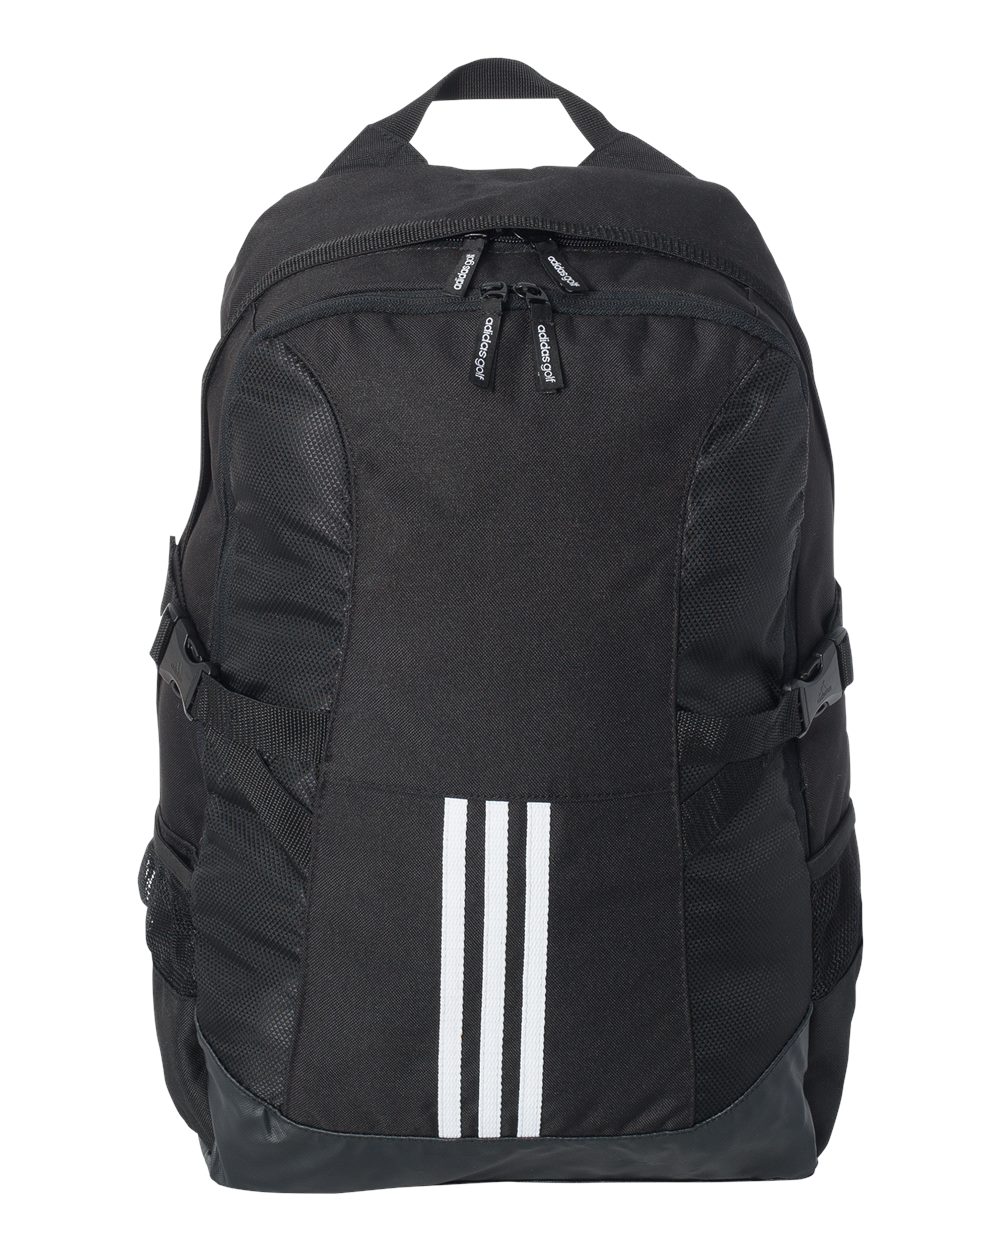 26L Backpack-Adidas